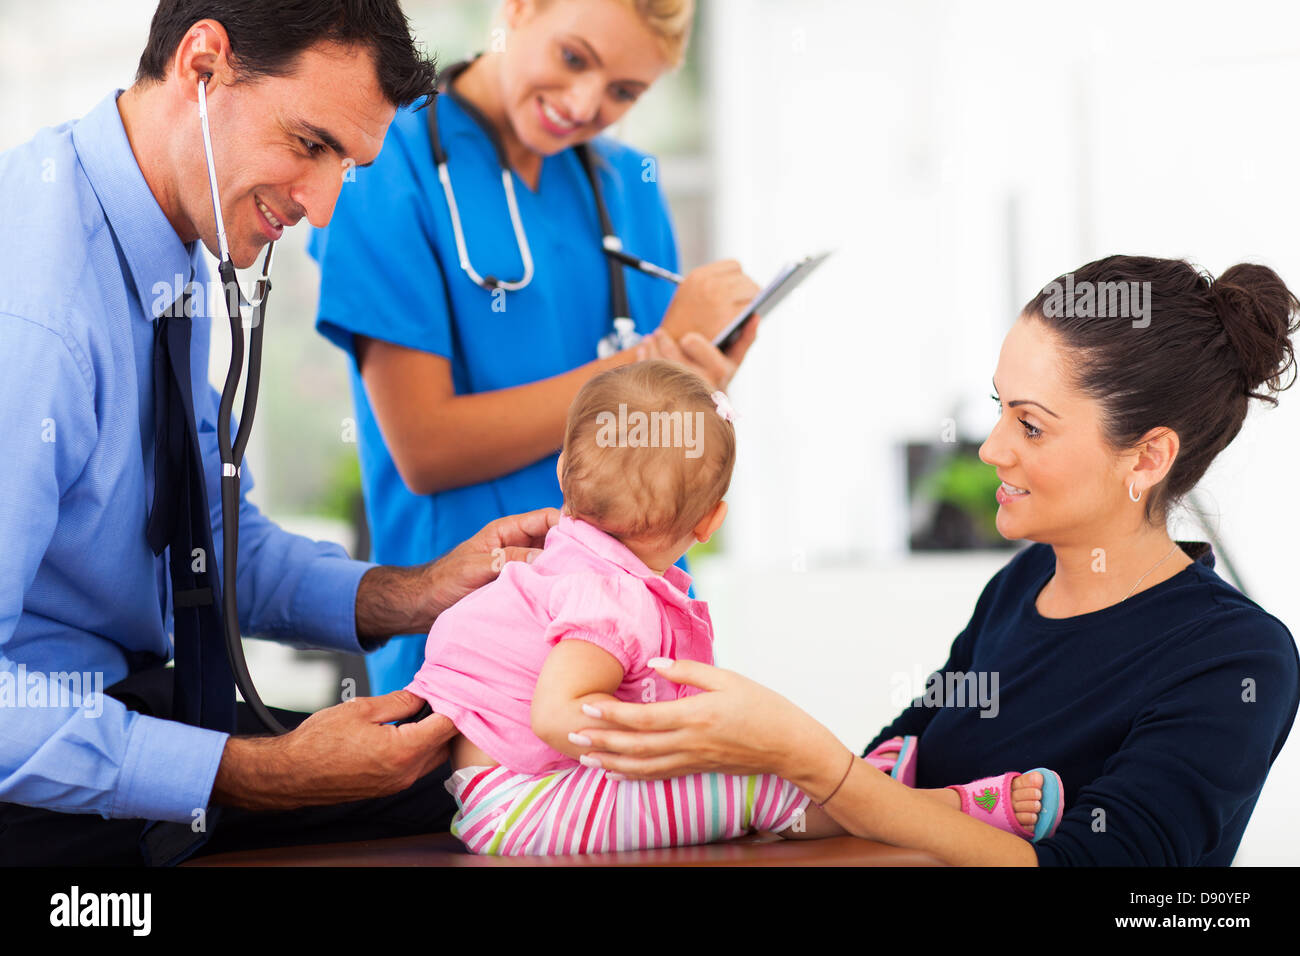 friendly male doctor examining a baby girl in office Stock Photo